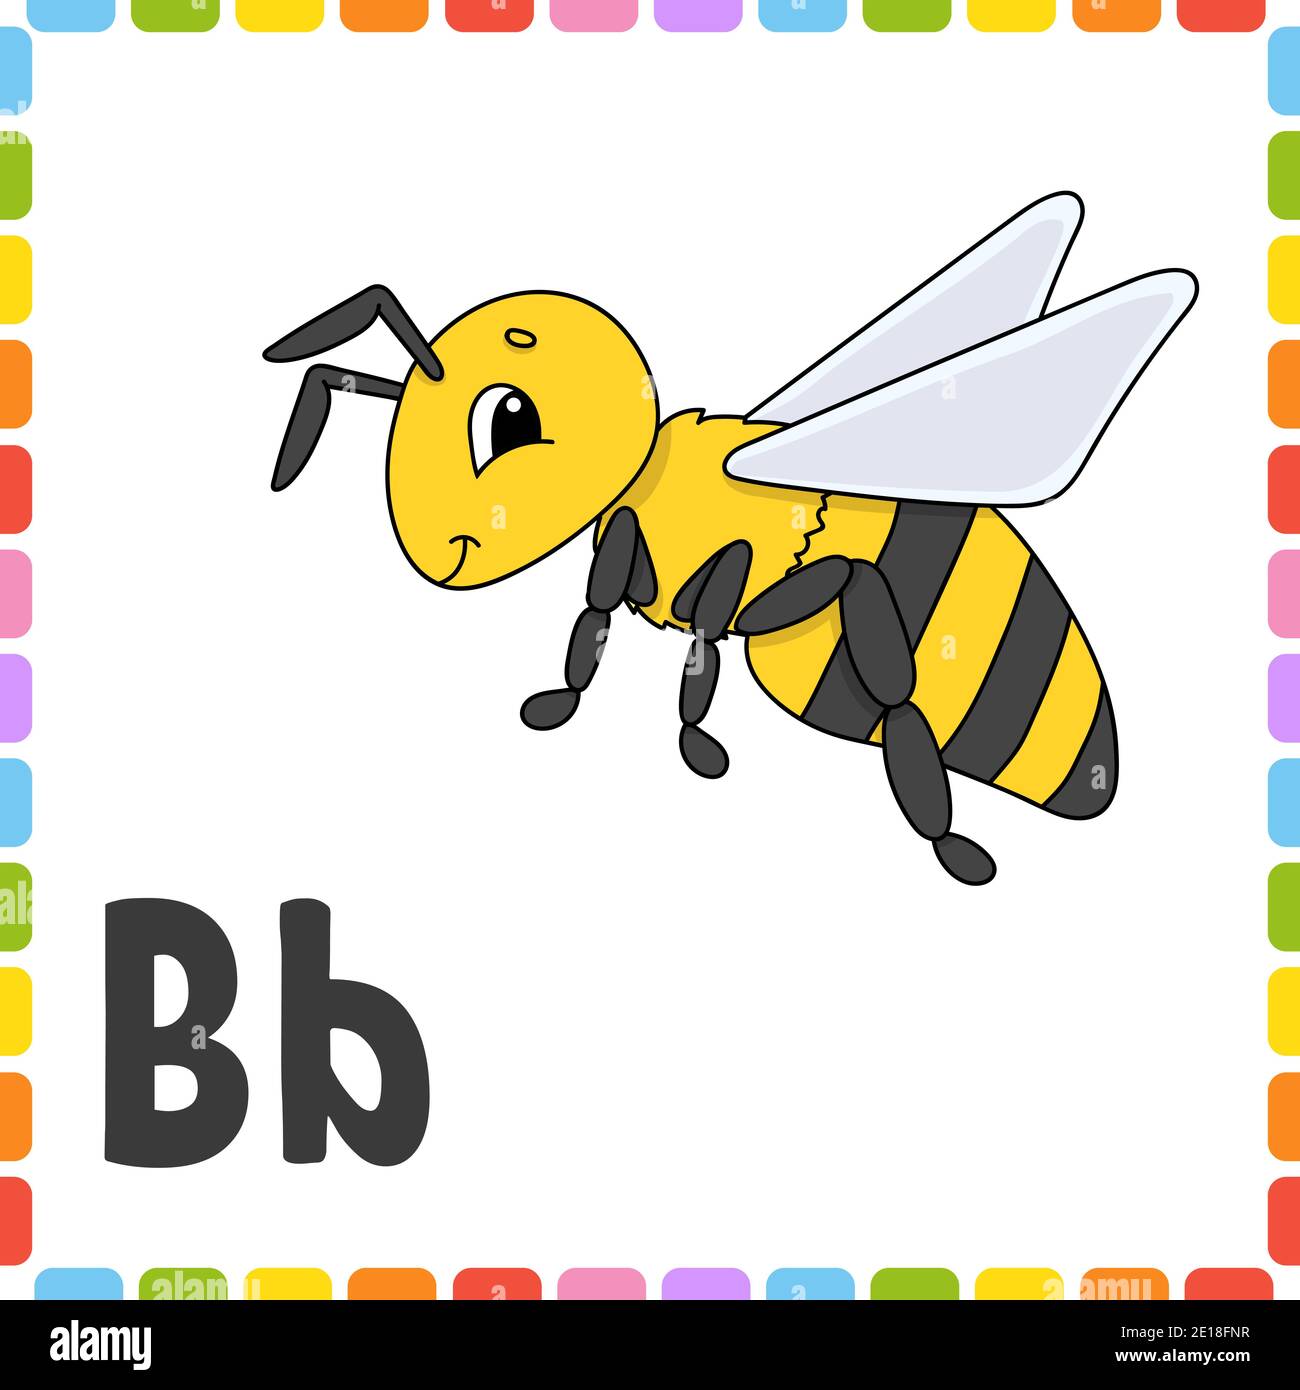 Funny alphabet. Letter B - bee. ABC square flash cards. Cartoon character isolated on white background. For kids education. Developing worksheet. Lear Stock Vector